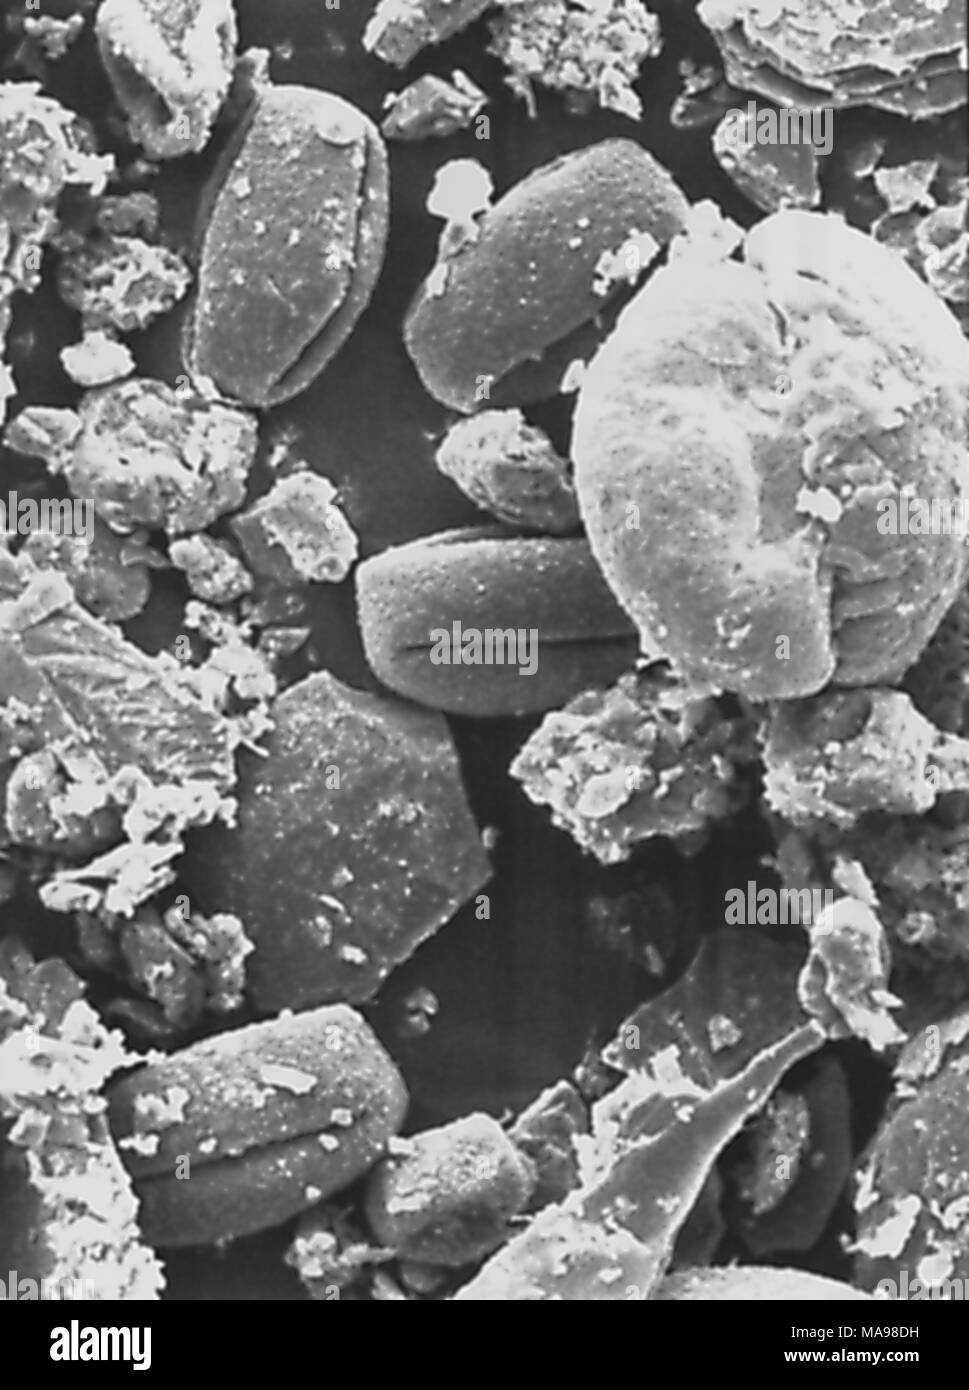 Morphologic array of pollen granules revealed in the photomicrograph film, Centers for Disease Control (CDC) campus, Atlanta, Georgia, 2004. Image courtesy Centers for Disease Control / Janice Carr. () Stock Photo